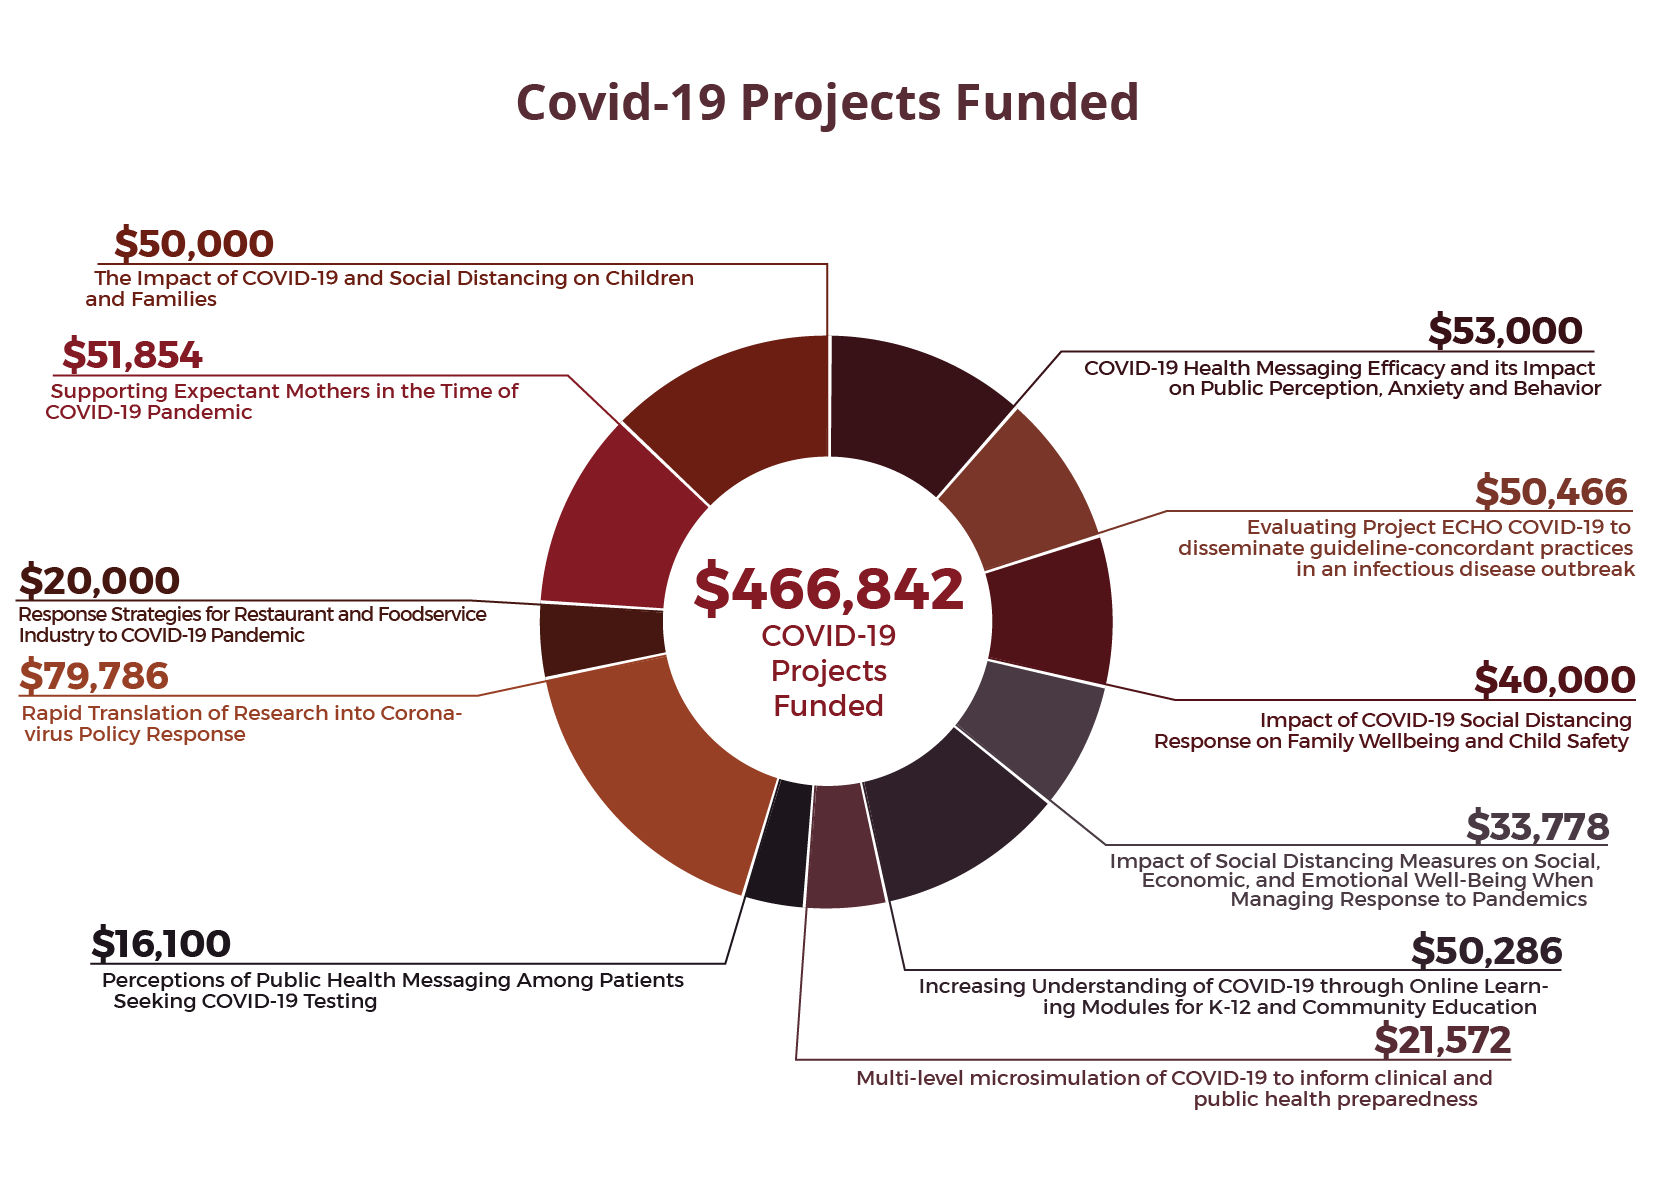 Pie chart depicting Covid-19 Projects Funded, broken down by dollar amount and project.